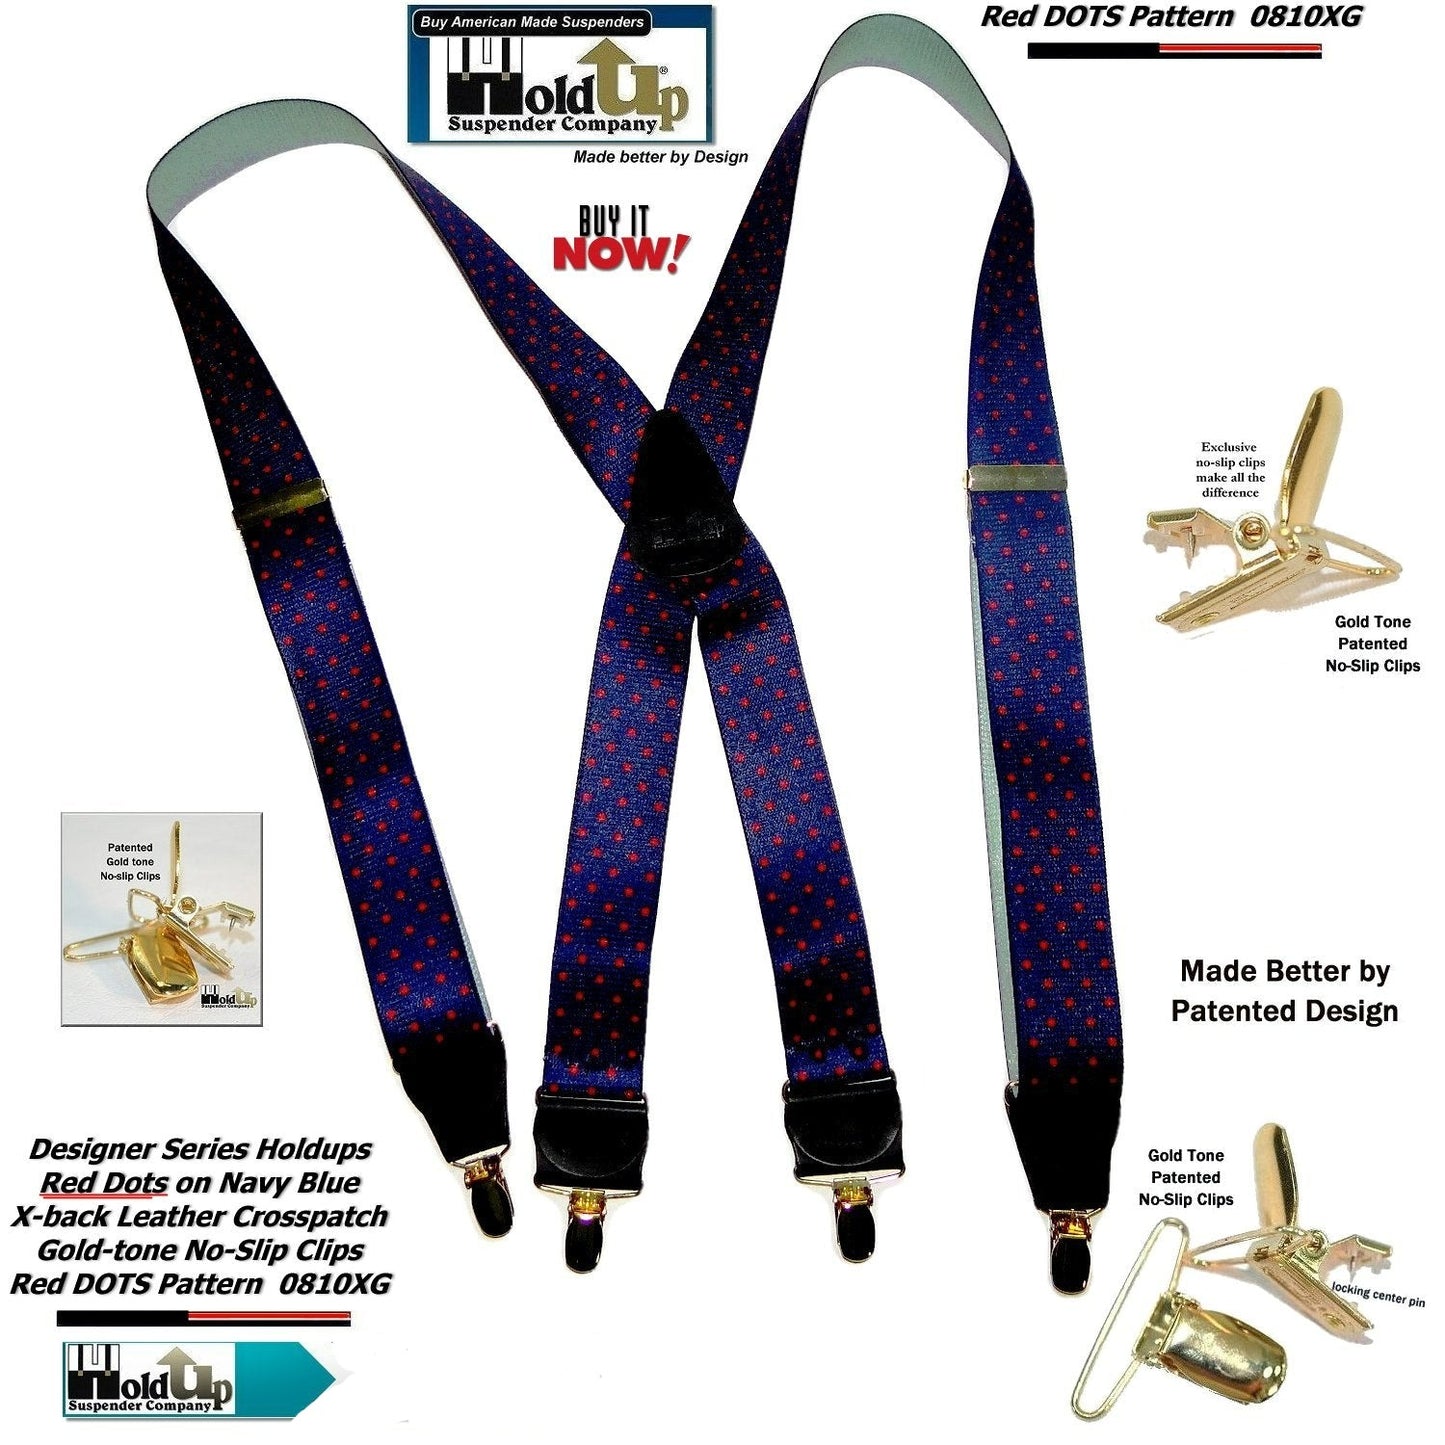 Holdup Brand Dark Blue with Red Dot Pattern X-back Suspenders USA Patented No-slip Clips